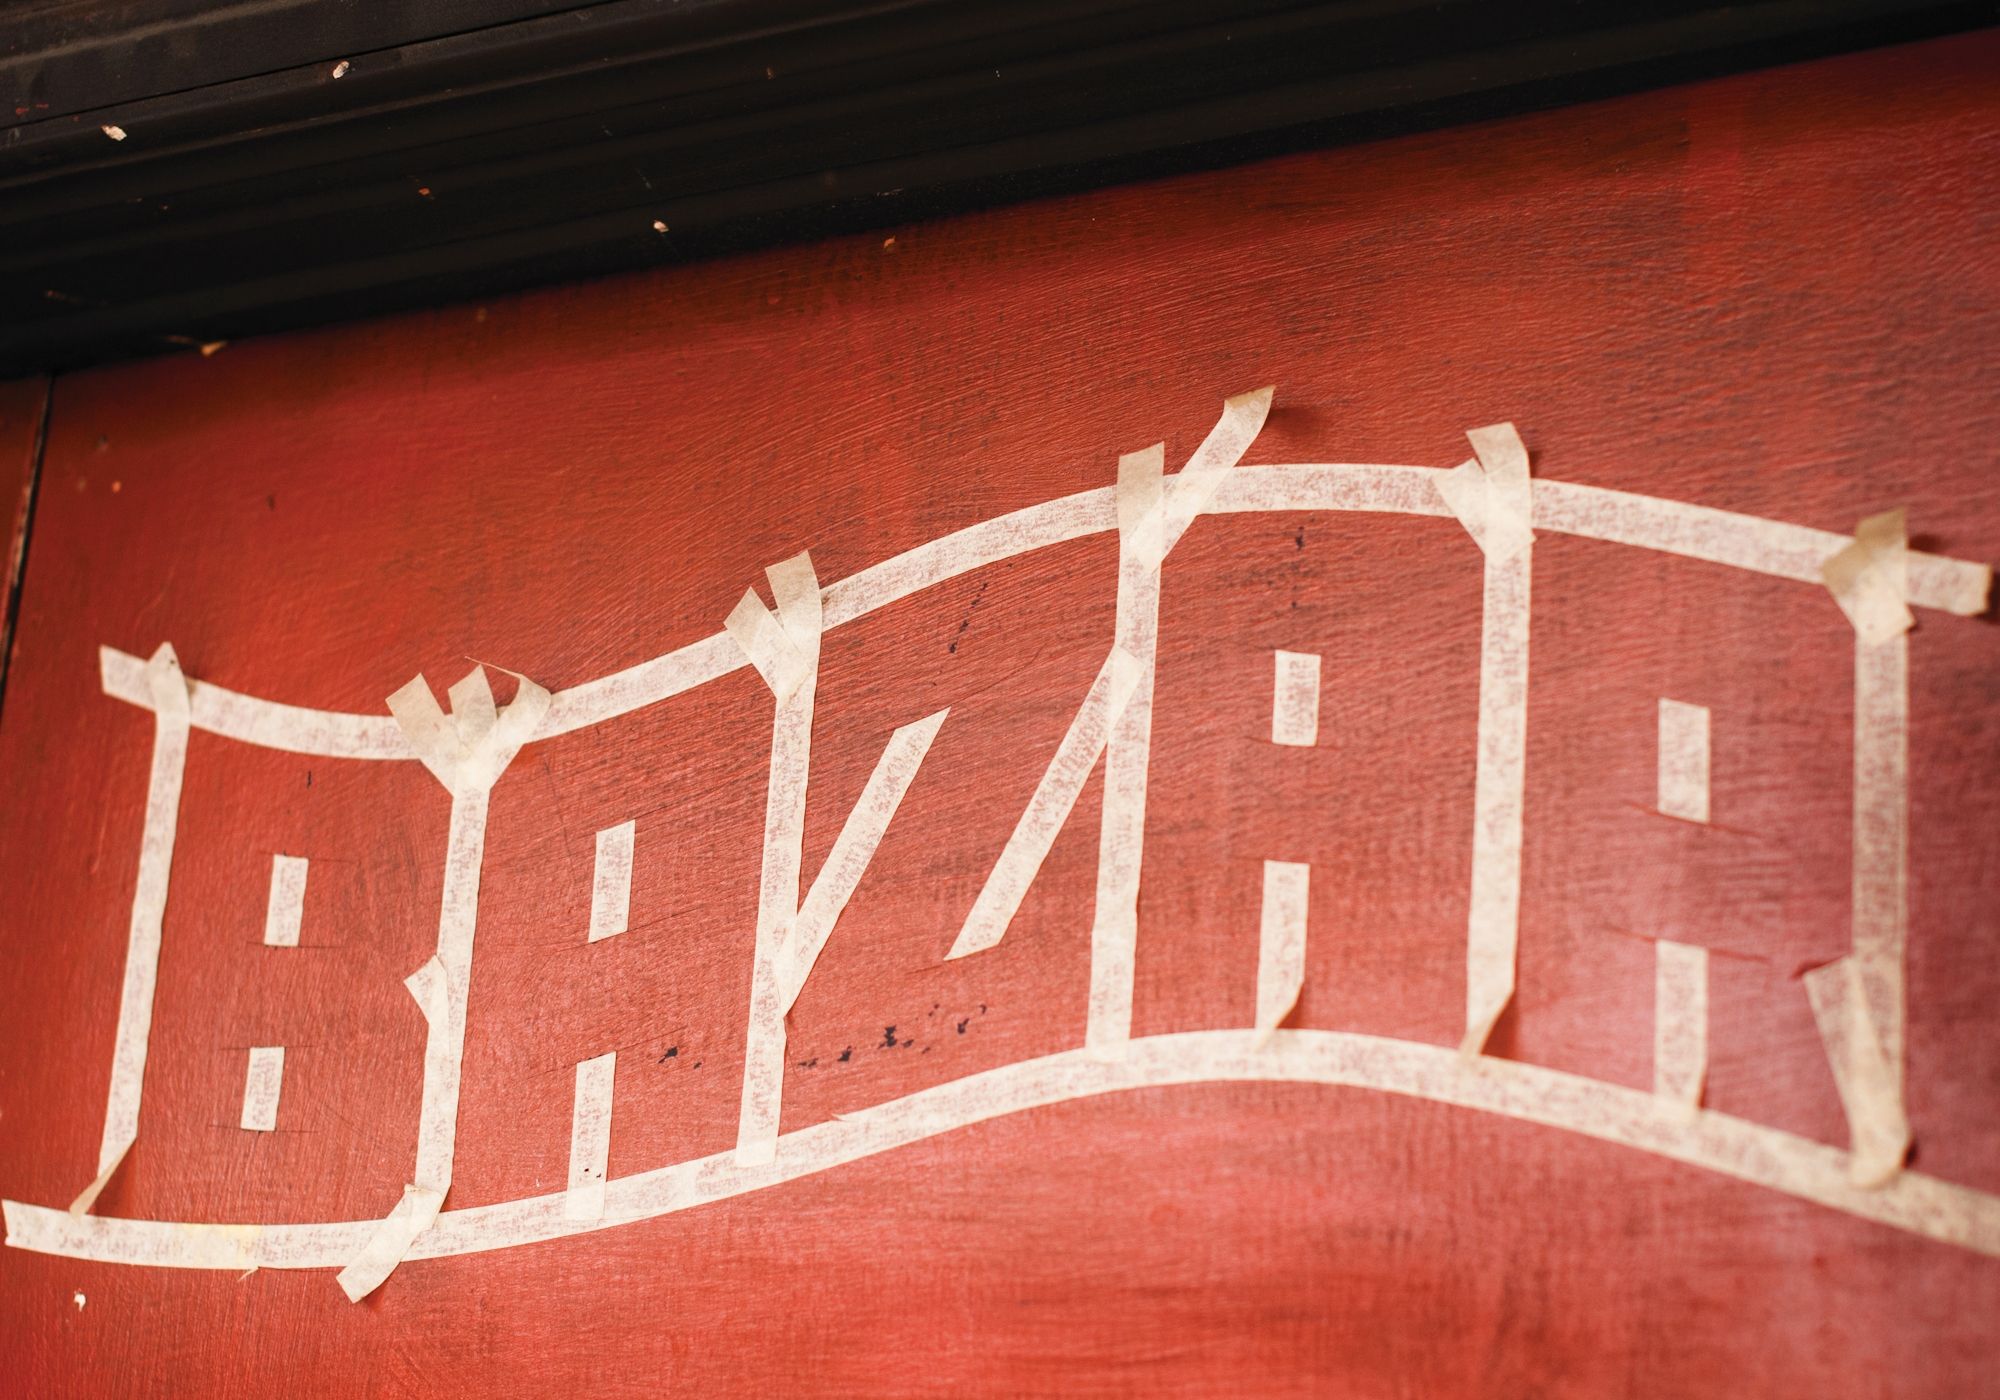 Red wall with the word 'BAZAR' outlined in masking tape ahead of painting in the letters.